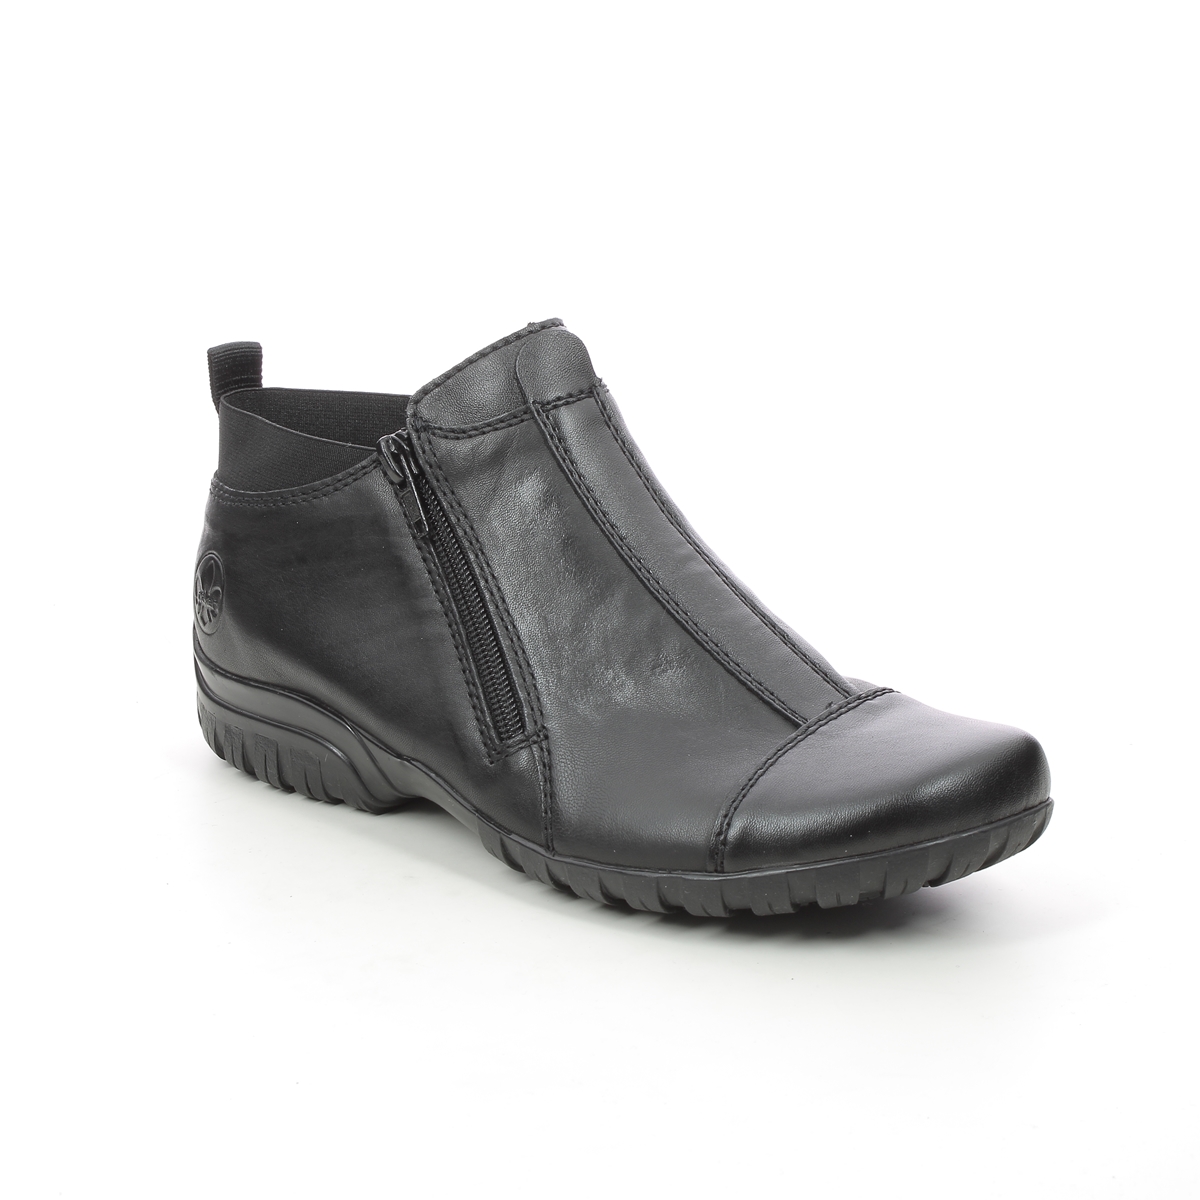 Rieker Birbocap 15 Black Leather Womens Ankle Boots L4653-00 In Size 42 In Plain Black Leather